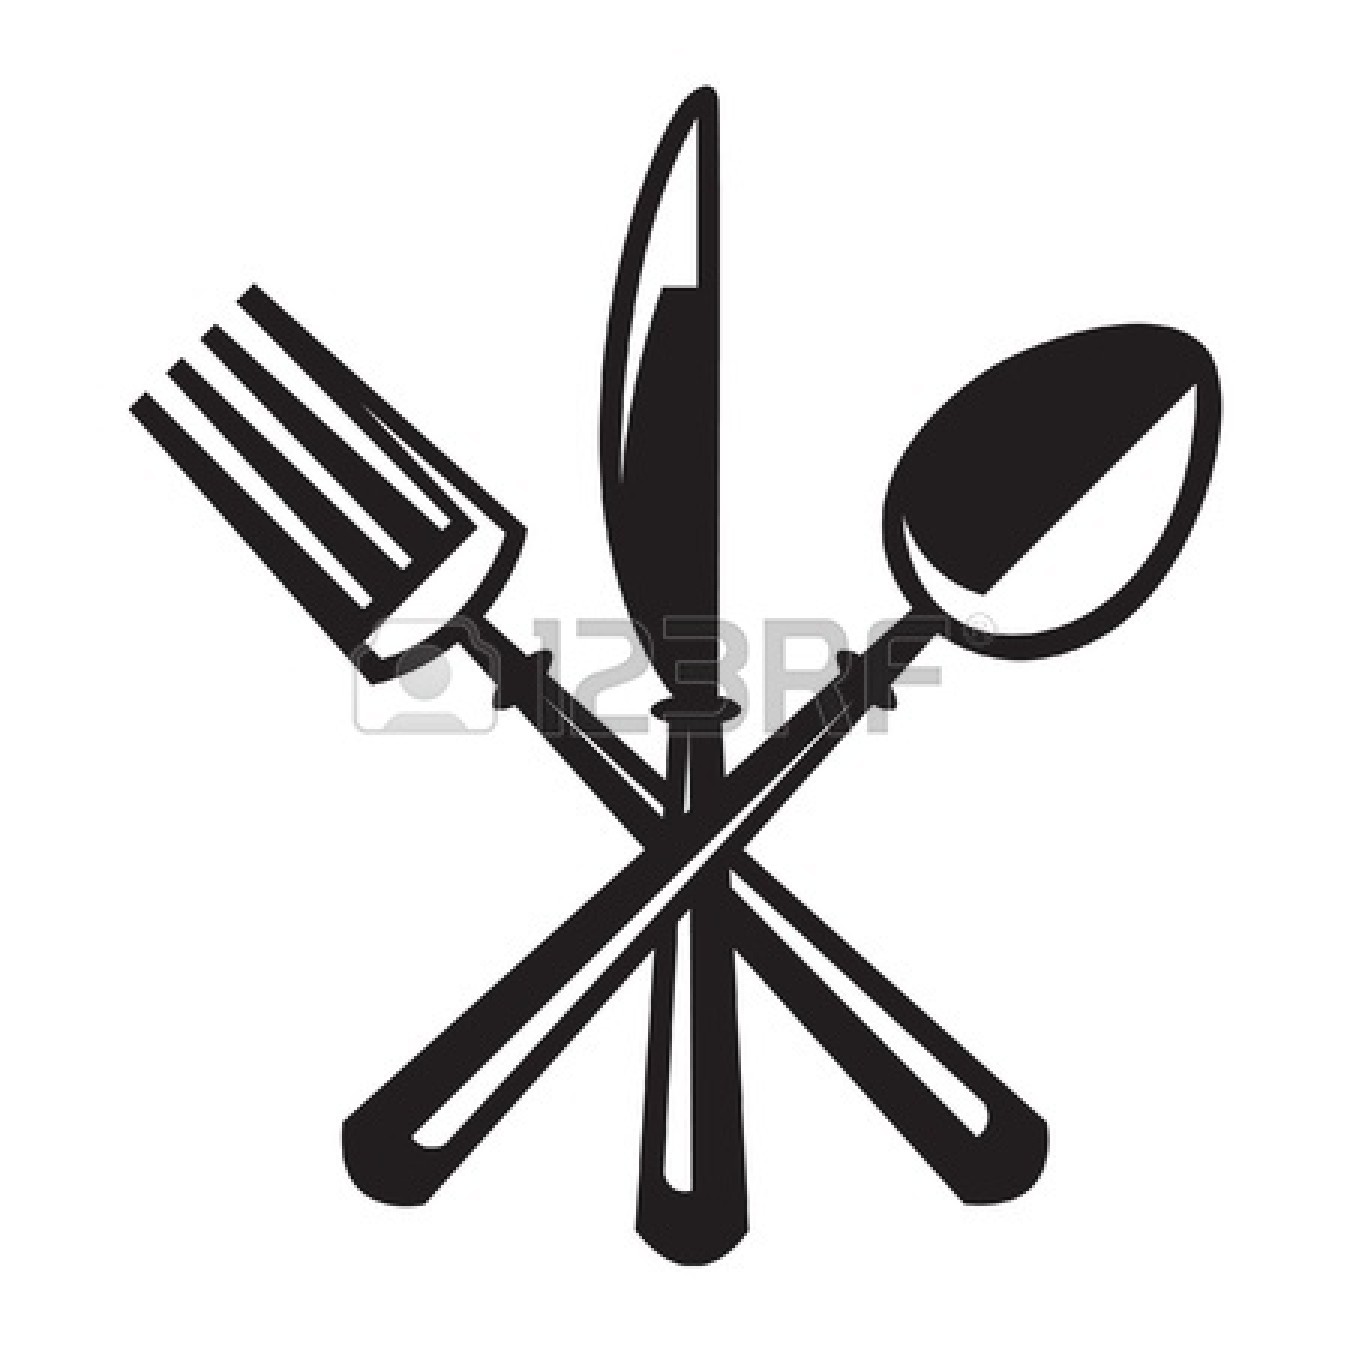 Spoon And Fork Crossed   Clipart Panda   Free Clipart Images